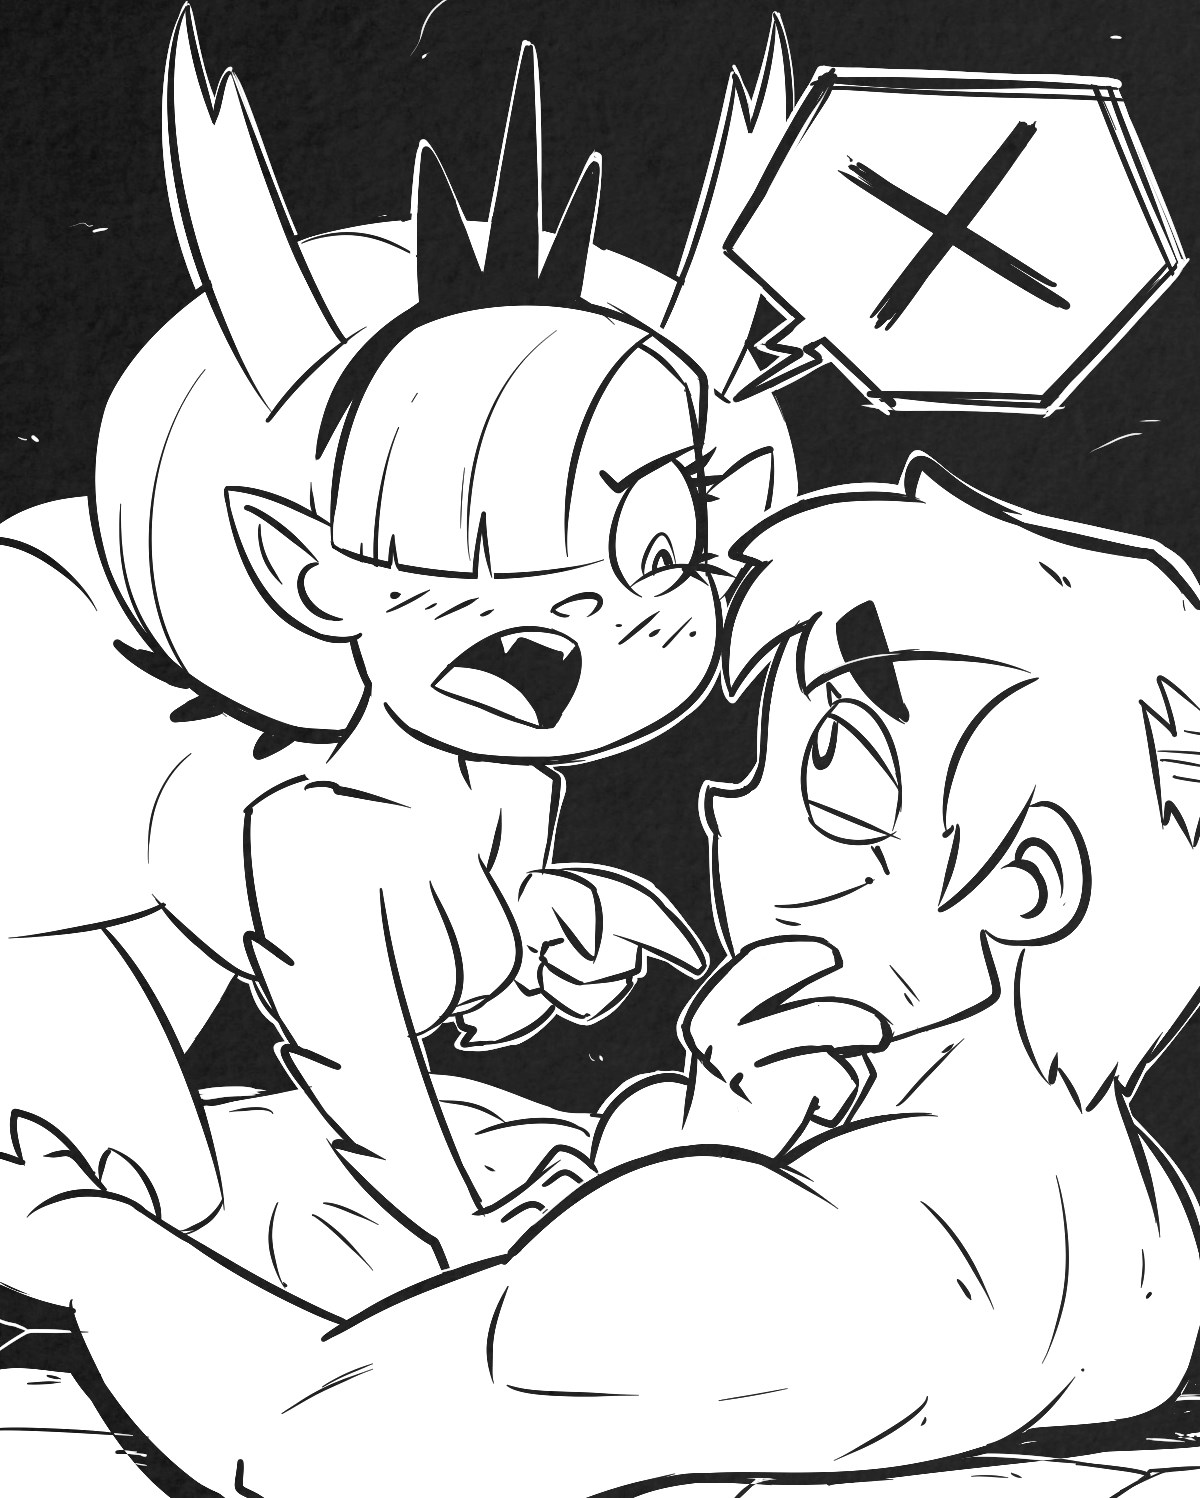 Hekapoo Markapoo - ADULTS ONLY sex porn comics online star vs. the forces o...